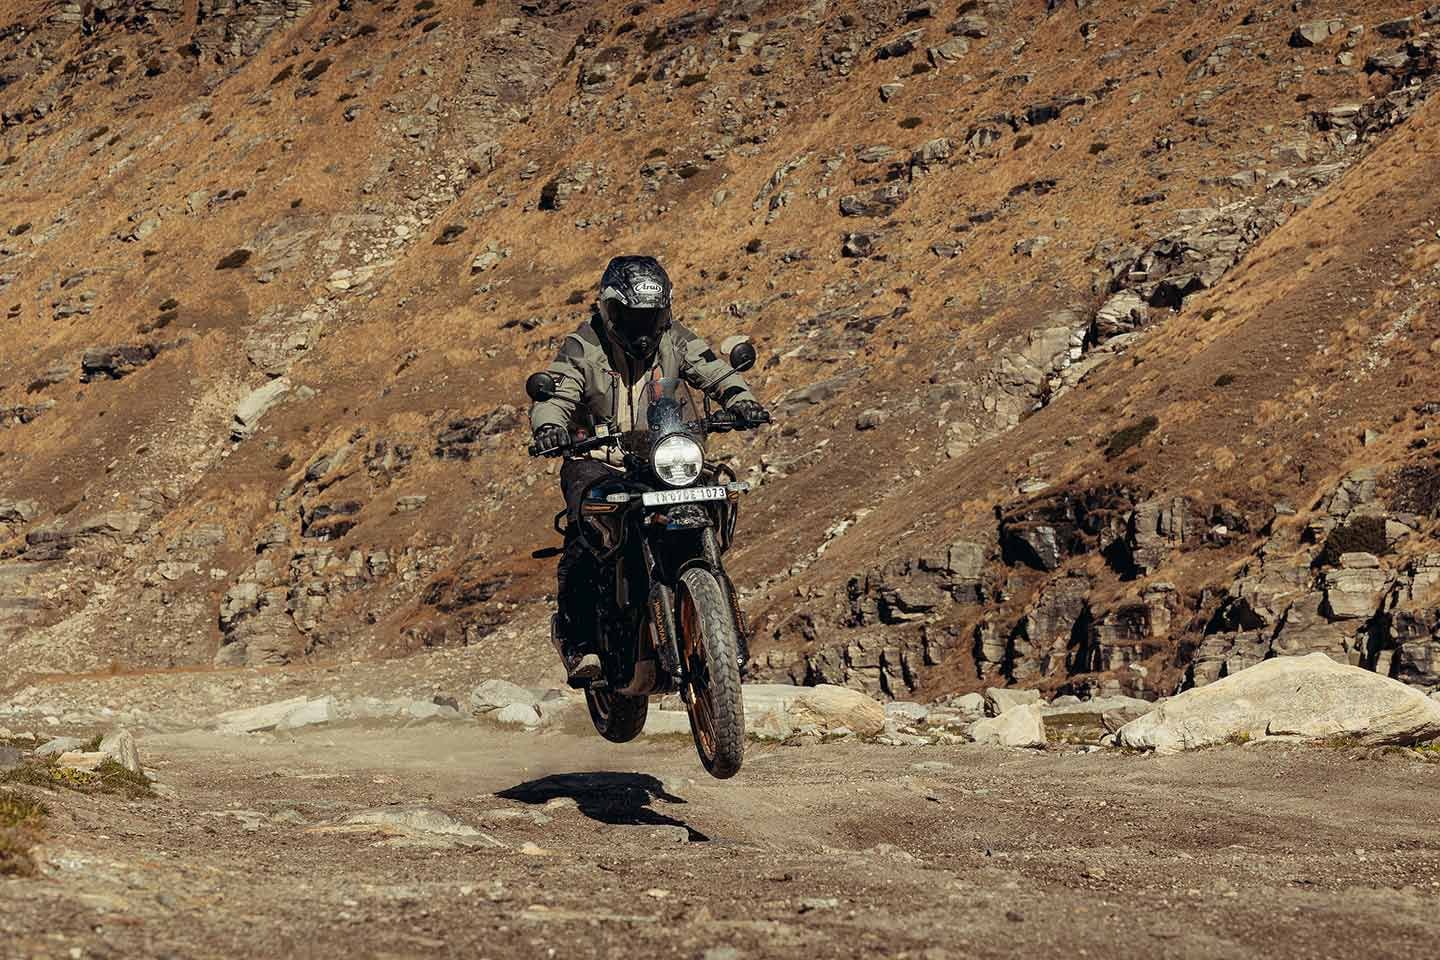 Make no mistake, the new Himalayan is ADV worthy, with a really competent chassis and good suspension.